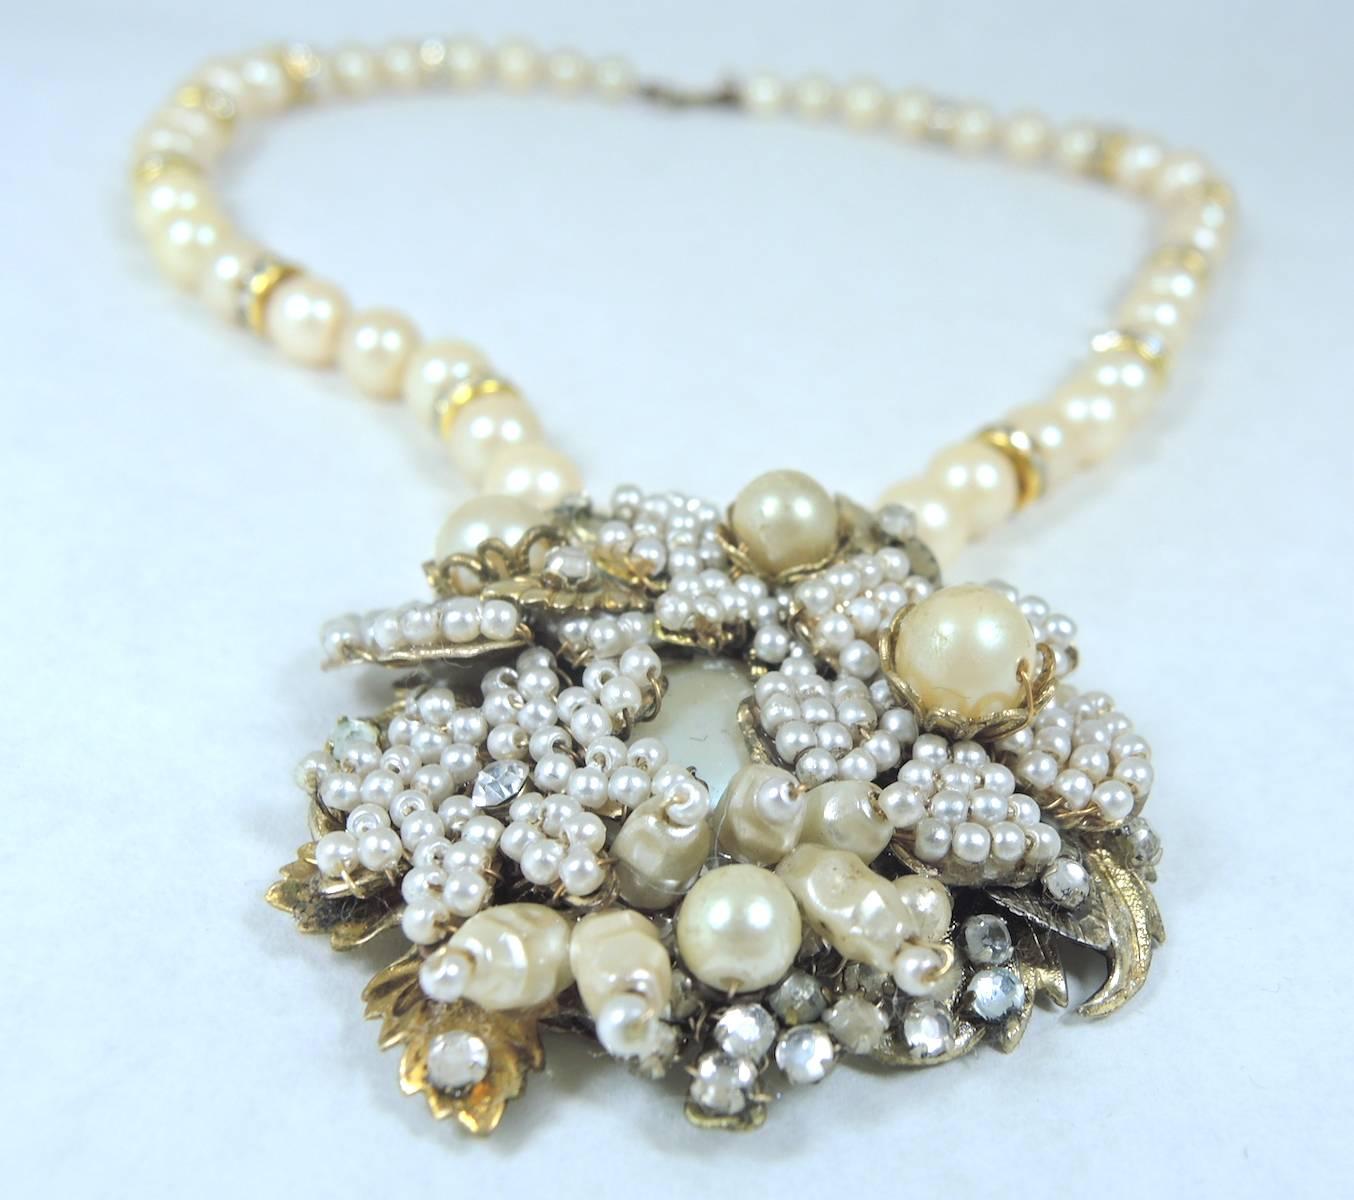 Vintage 1950s Signed Miriam Haskell Floral Faux Pearl Necklace In Excellent Condition For Sale In New York, NY